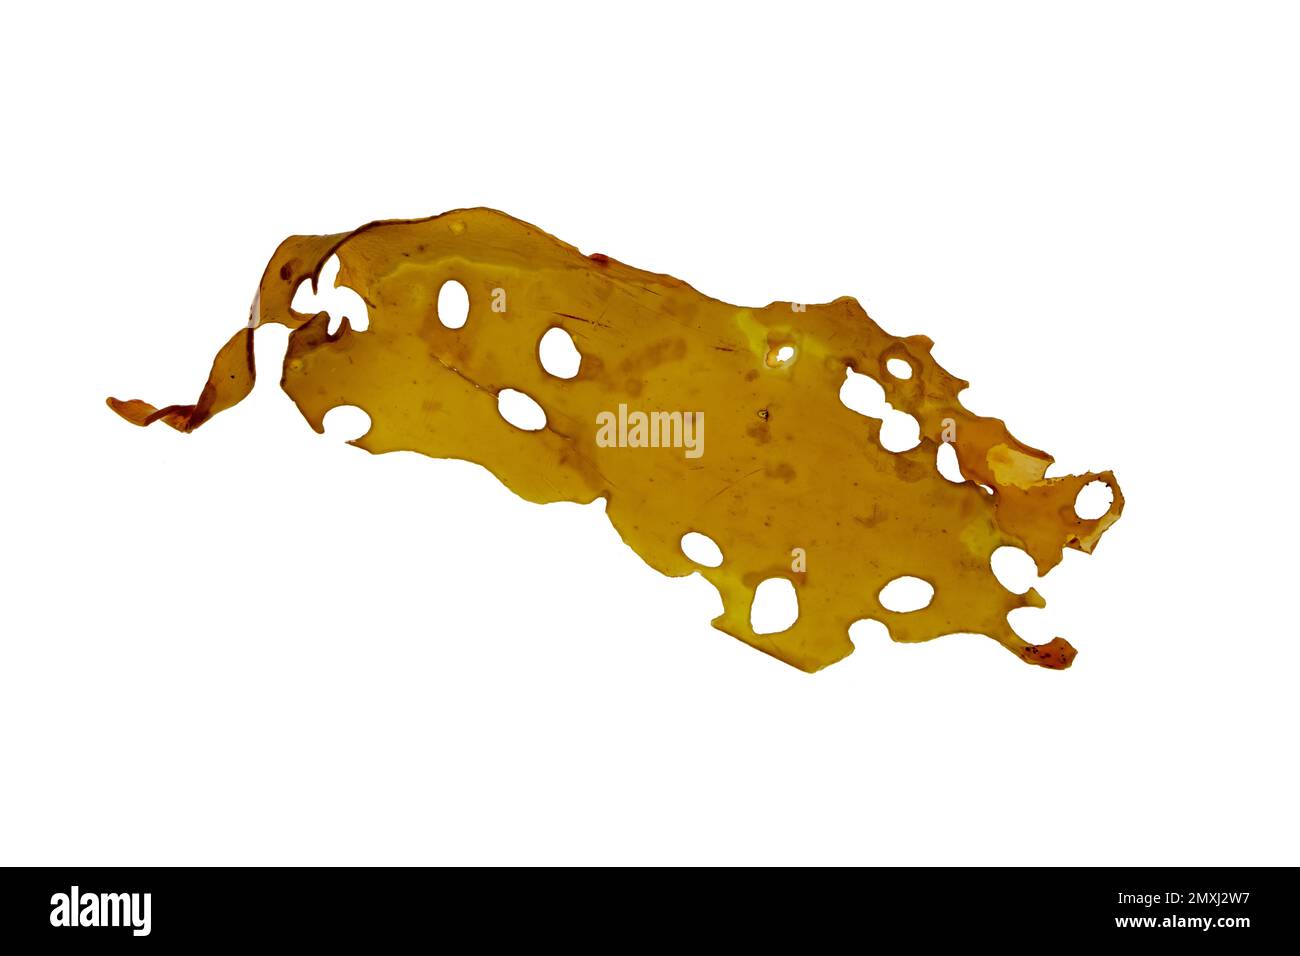 Laminaria isolated on white. Brown seaweed or kelp. Food and iodine source sea algae. Holdfast and laminae. Medicine and cosmetics ingredient. Stock Photo